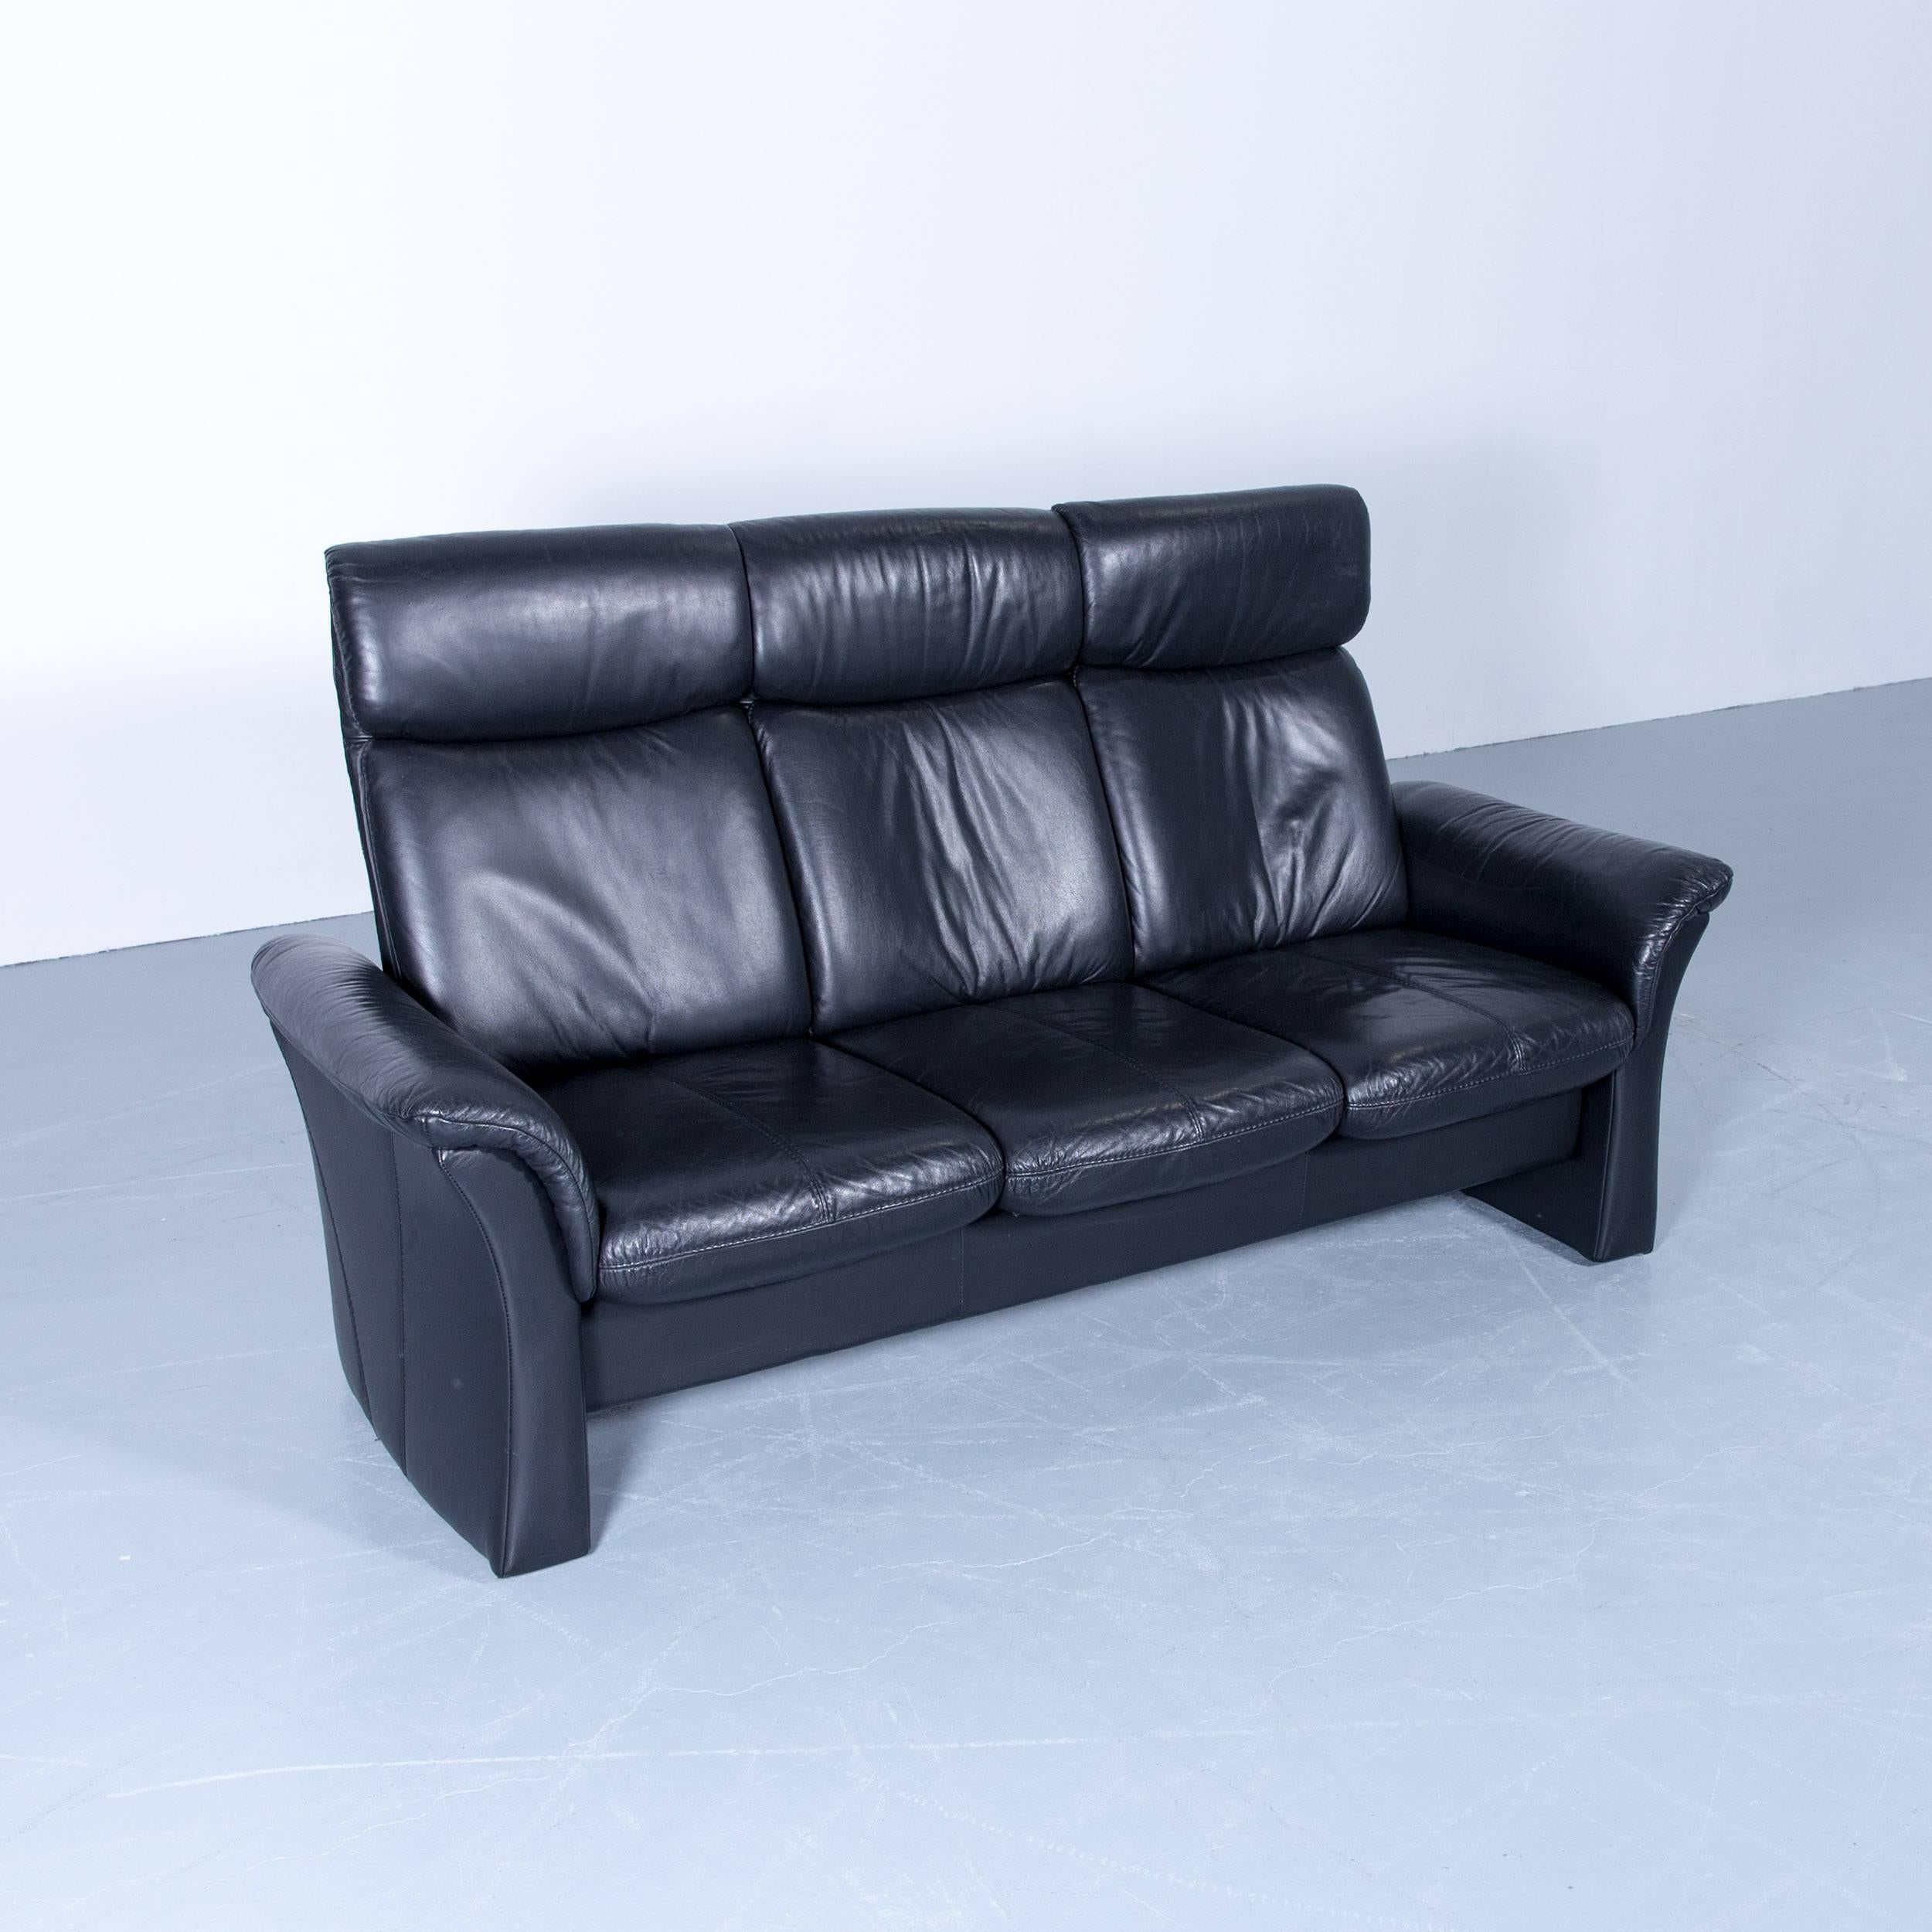 German Designer Three-Seat Sofa Black Relax Couch Leather Function Modern Three-Seat